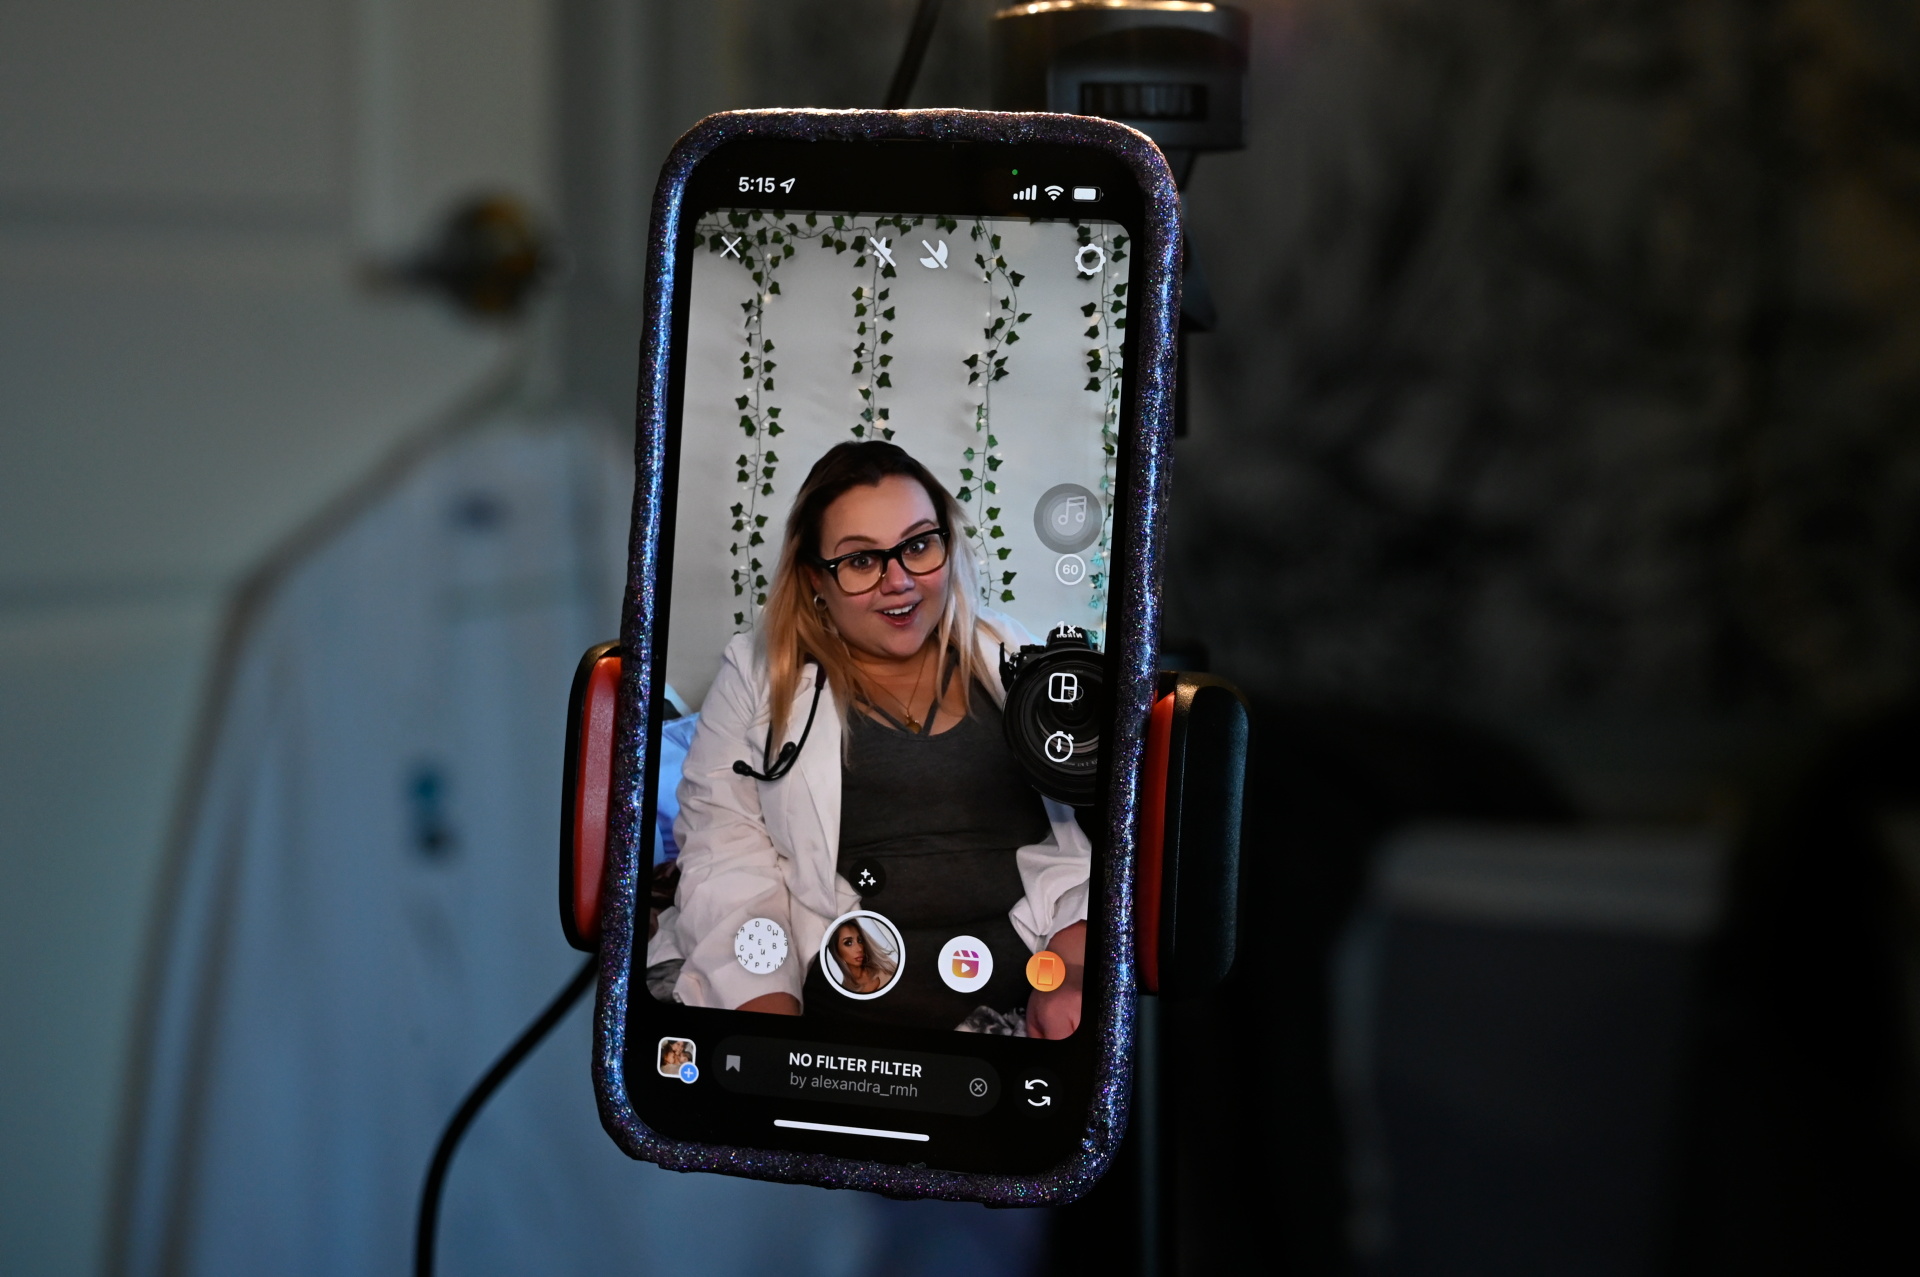 Spencer prepares to record a video for her Instagram account, at her apartment in Syracuse, New York, May 8, 2022. Photo: Reuters